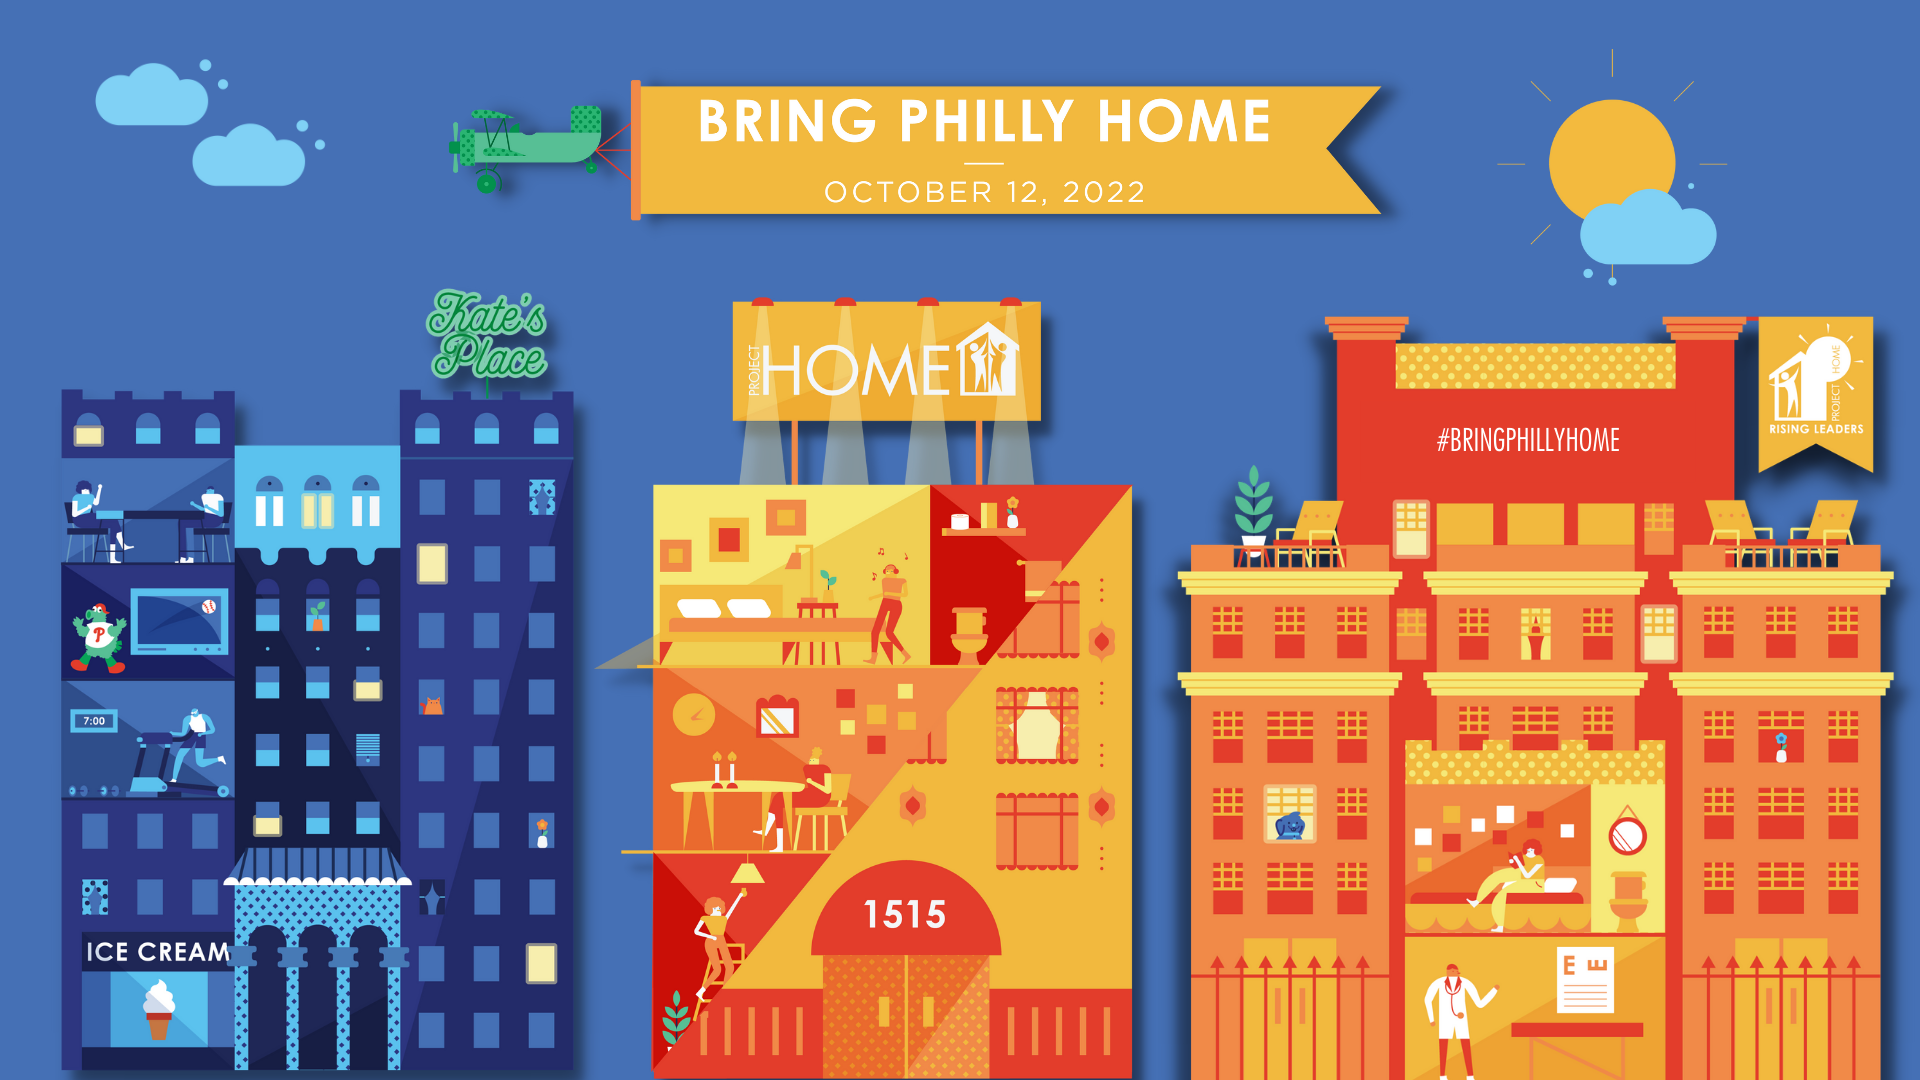 Project HOME's Bring Philly HOME celebration will be on October 12, 2022